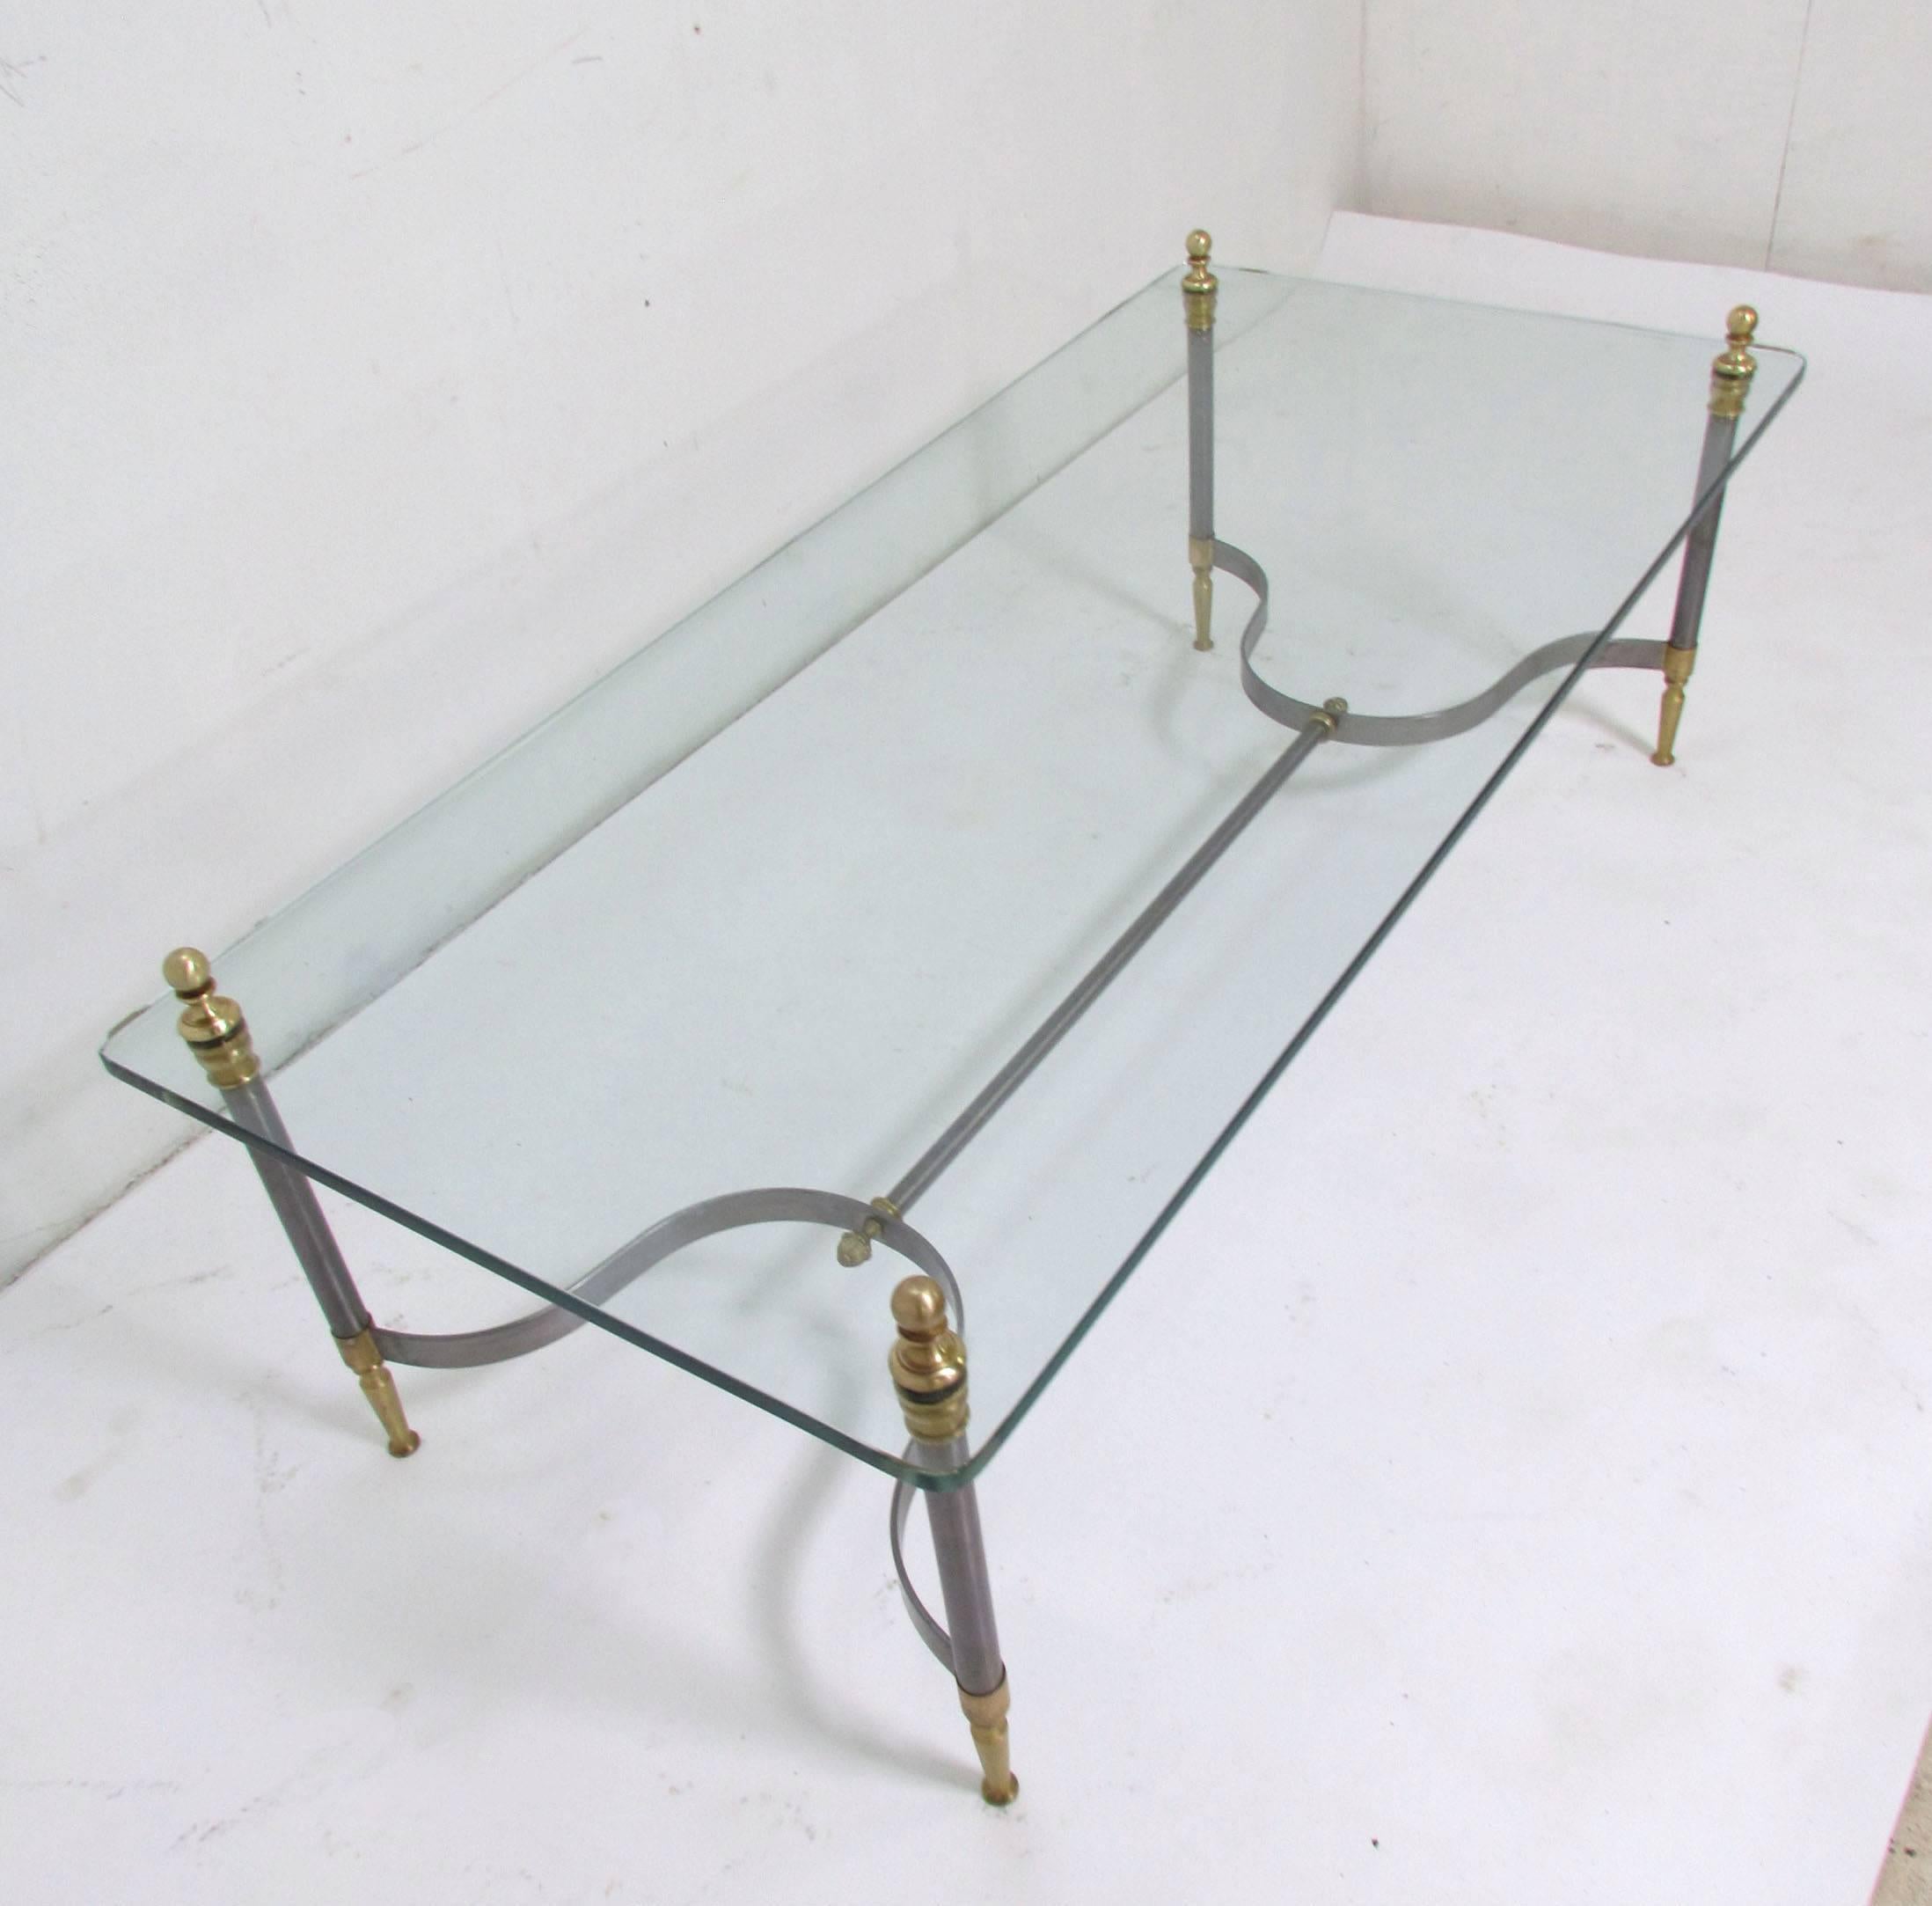 Stylish coffee table in brushed steel and brass in the manner of Maison Jansen, with polished edge glass top and through-post construction, circa 1960s.

Measures: 16